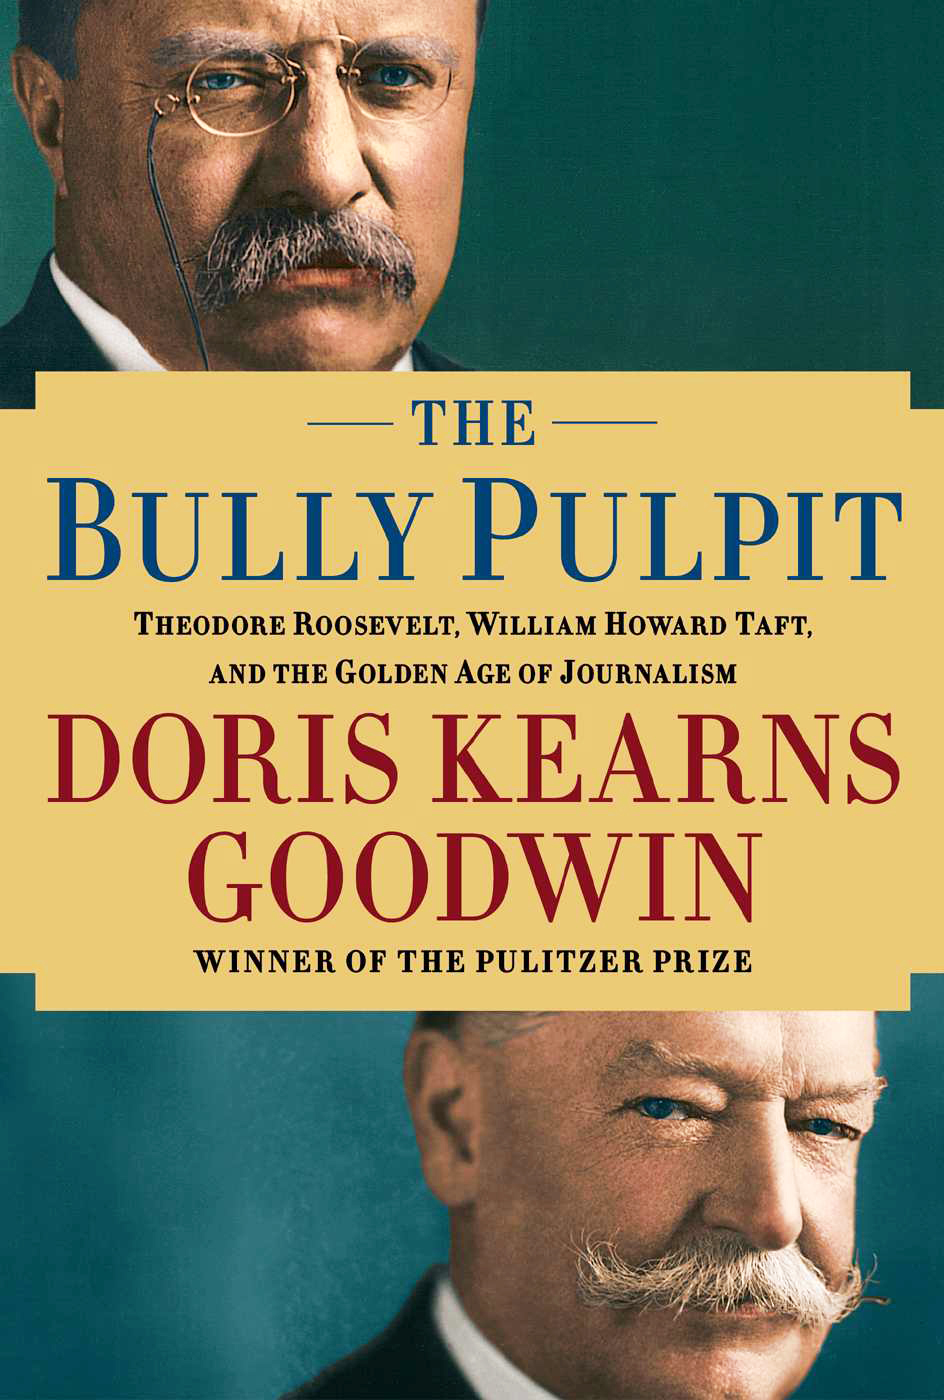 2013: "The Bully Pulpit: Theodore Roosevelt, William Howard Taft, and the Golden Age of Journalism"